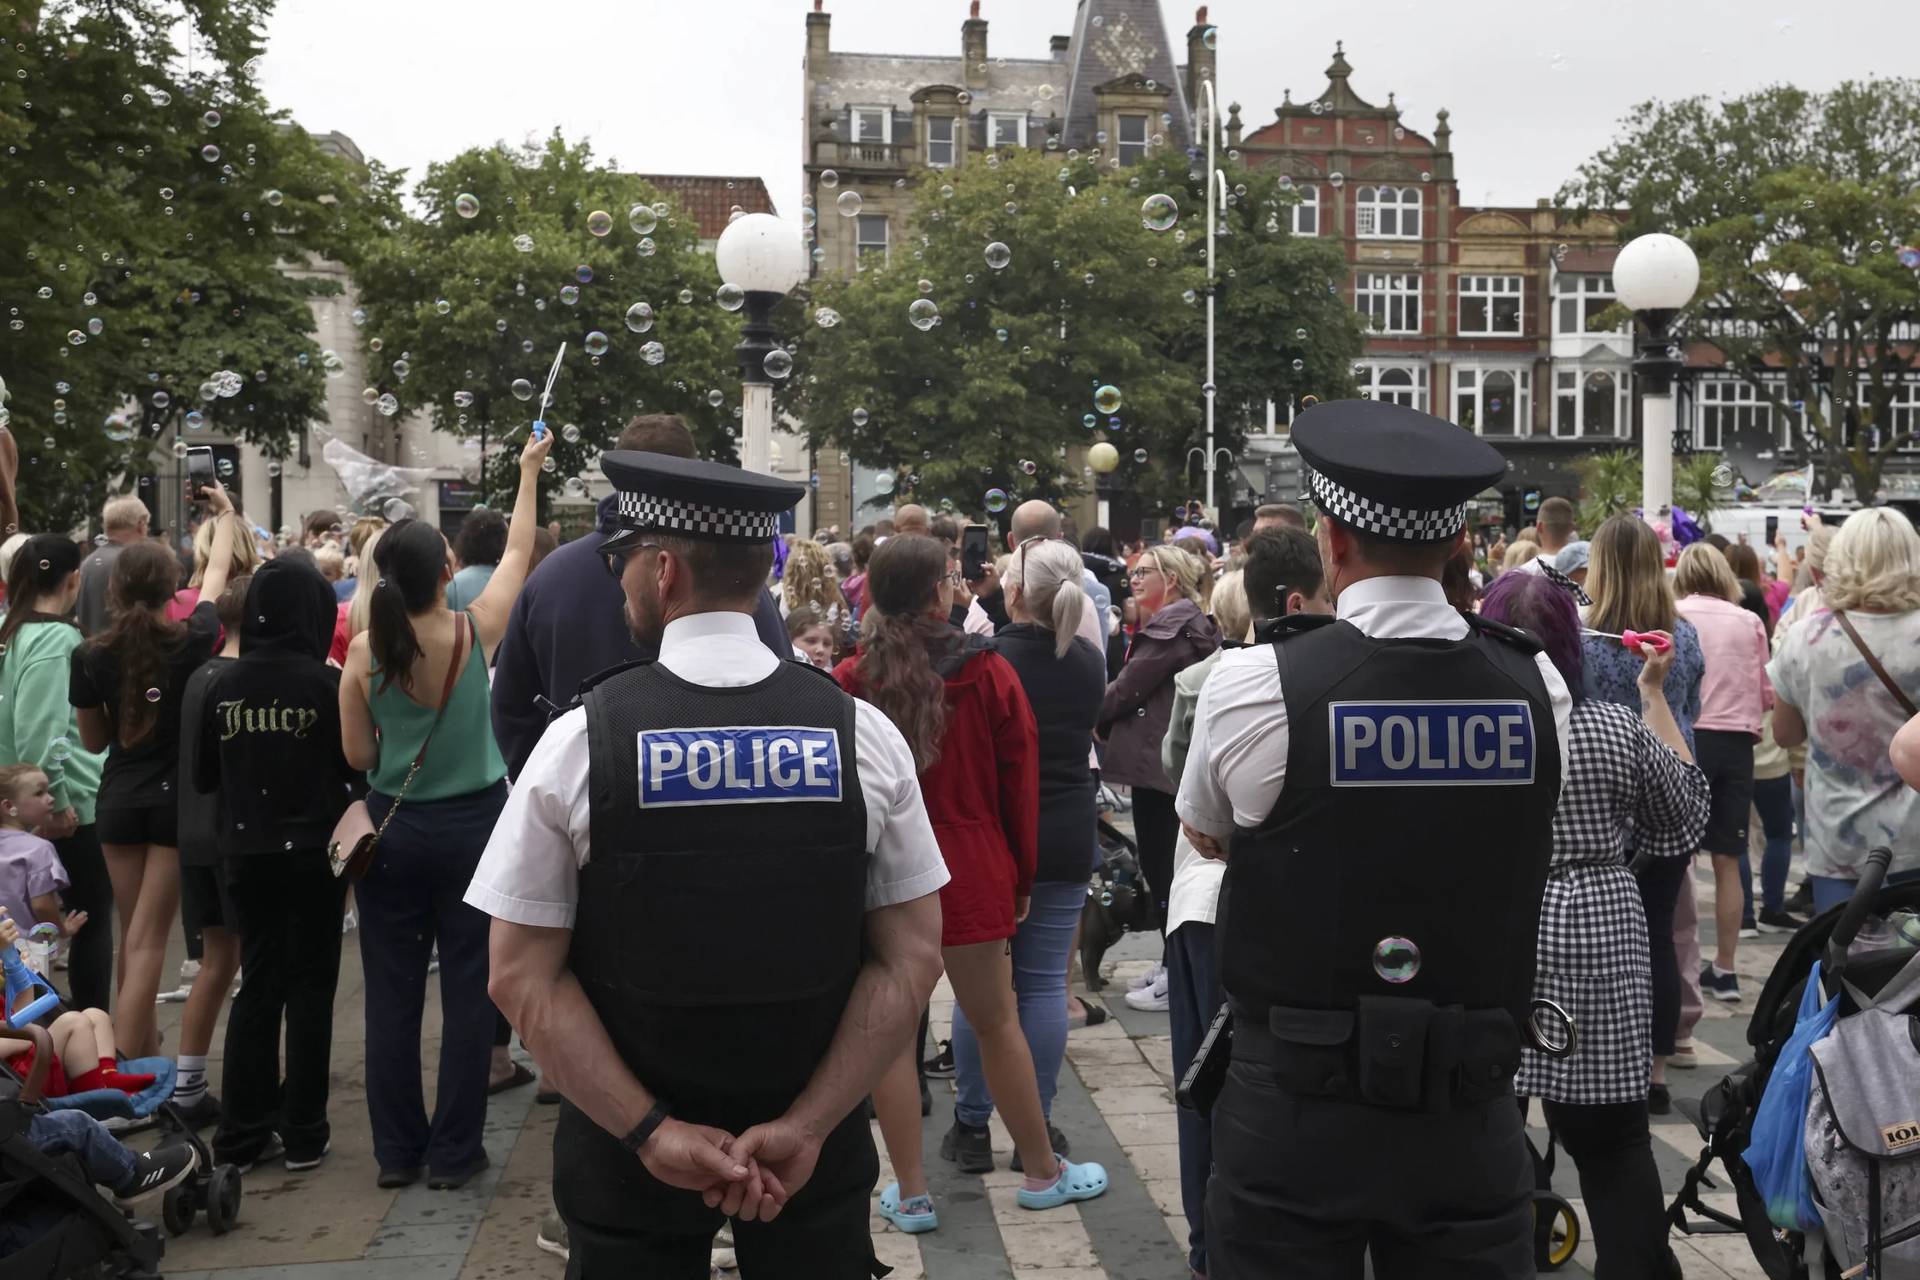 Police officers watch members of the public outside the Town Hall during a vigil for the victims of a stabbing attack in Southport, England, that happened on July 29. The vigil took place on Aug. 5. (Credit: Darren Staples/AP.)